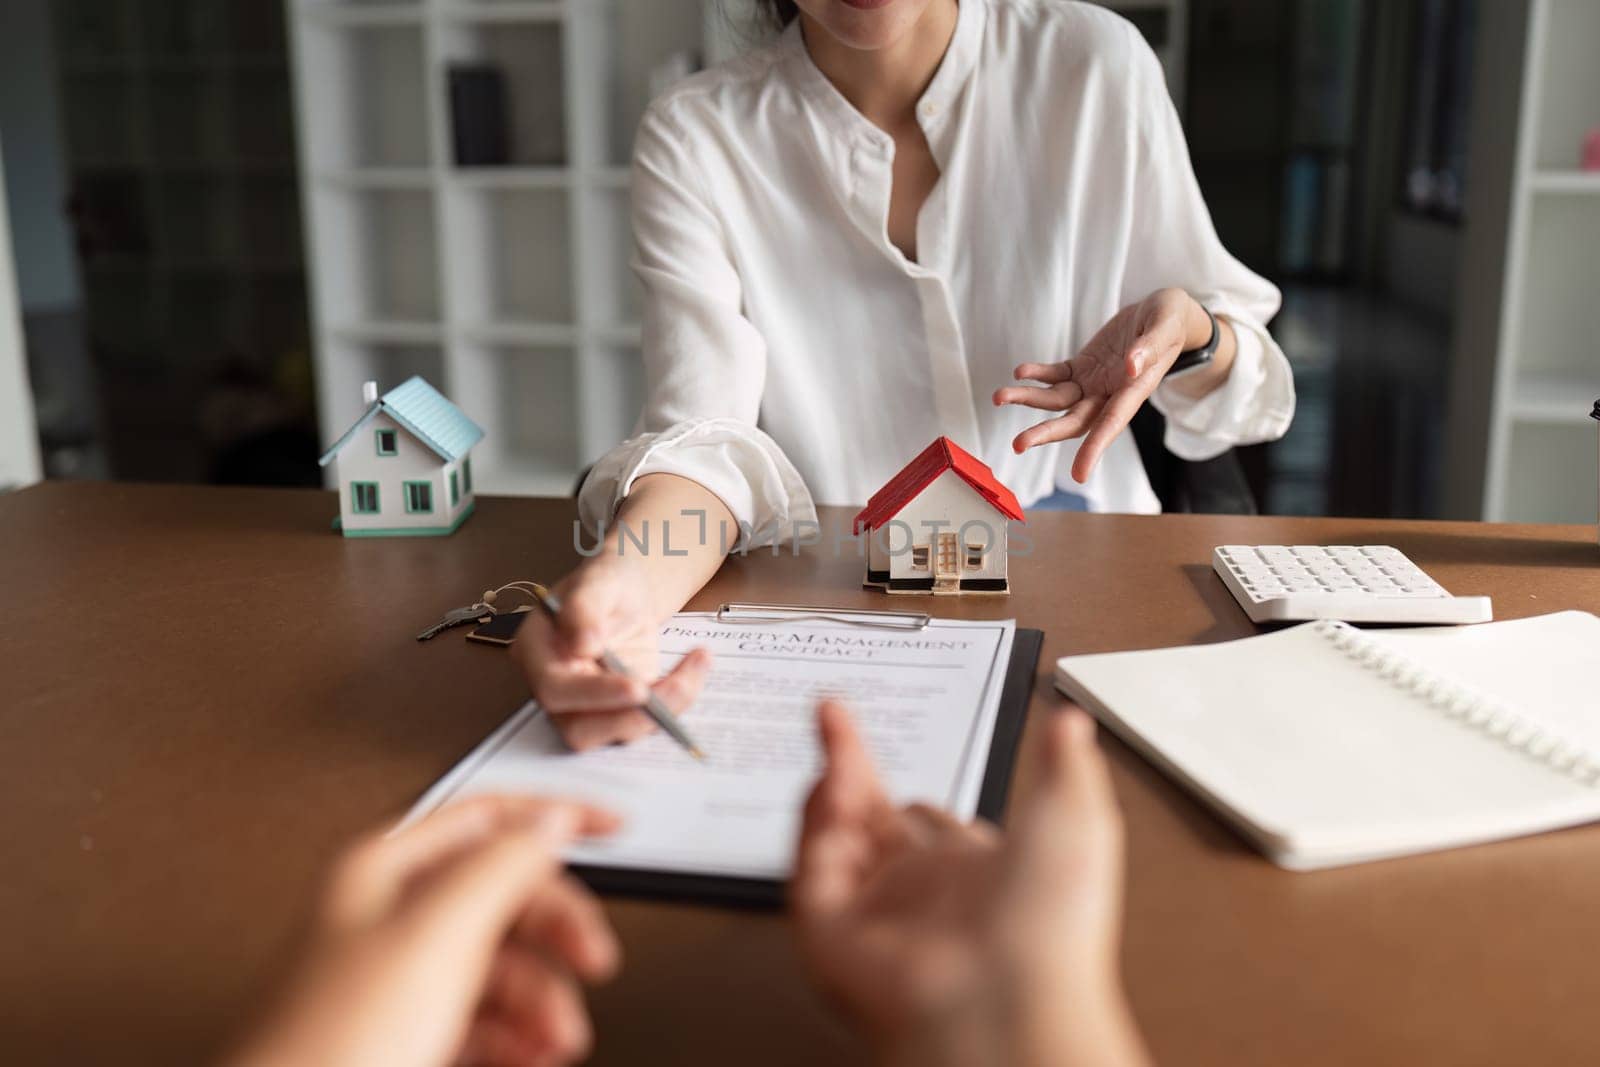 A woman is signing a document in front of a house model. The woman is wearing a white shirt and the house model is red